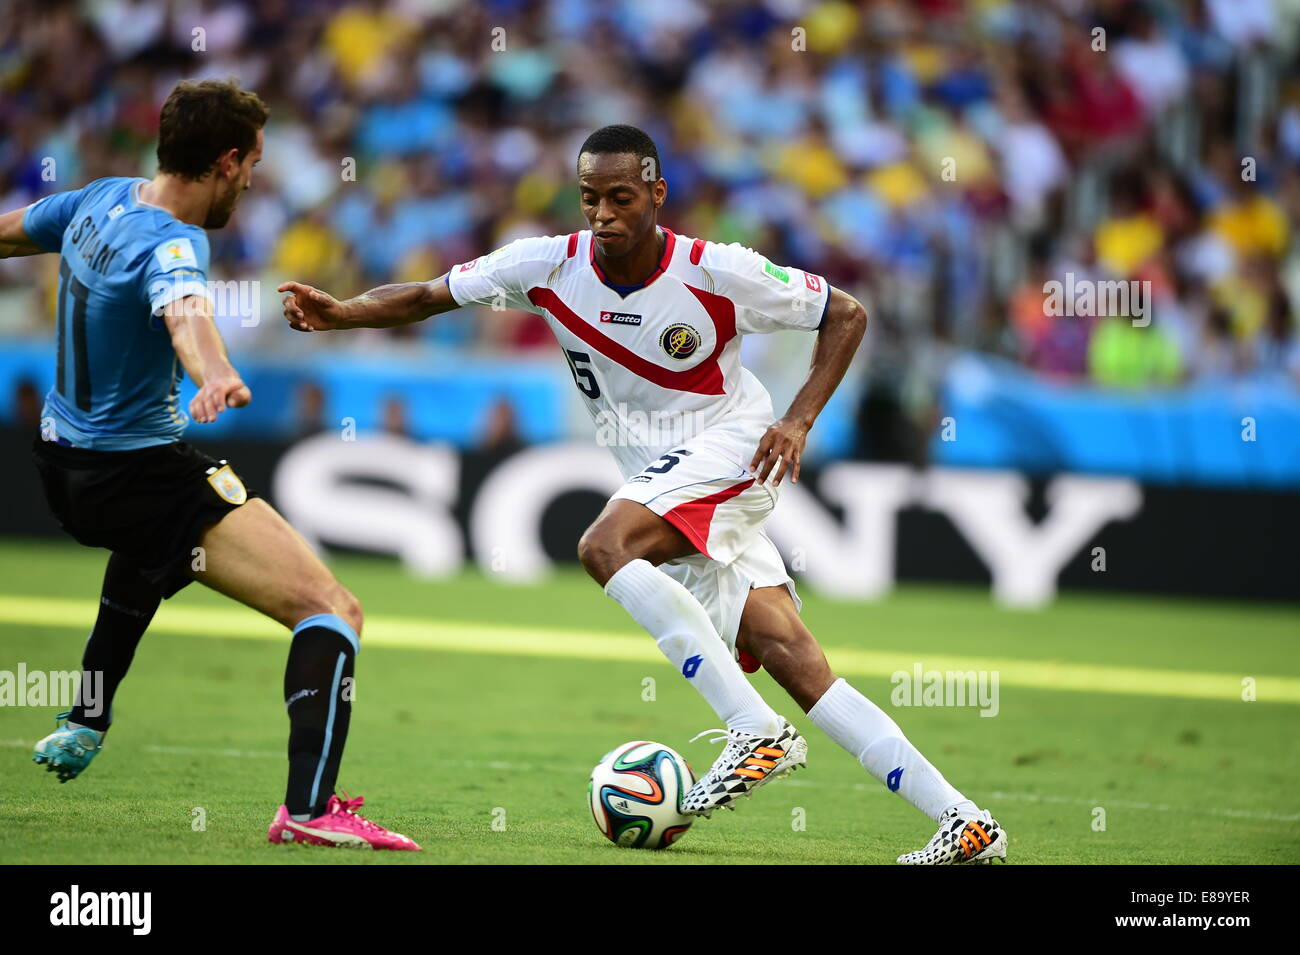 Celso Borges of Costa Rica. Uruguay v Costa Rica. World Cup group match. 14 June 2014. FIFA World Cup 2014. Castelao stadium, Fo Stock Photo